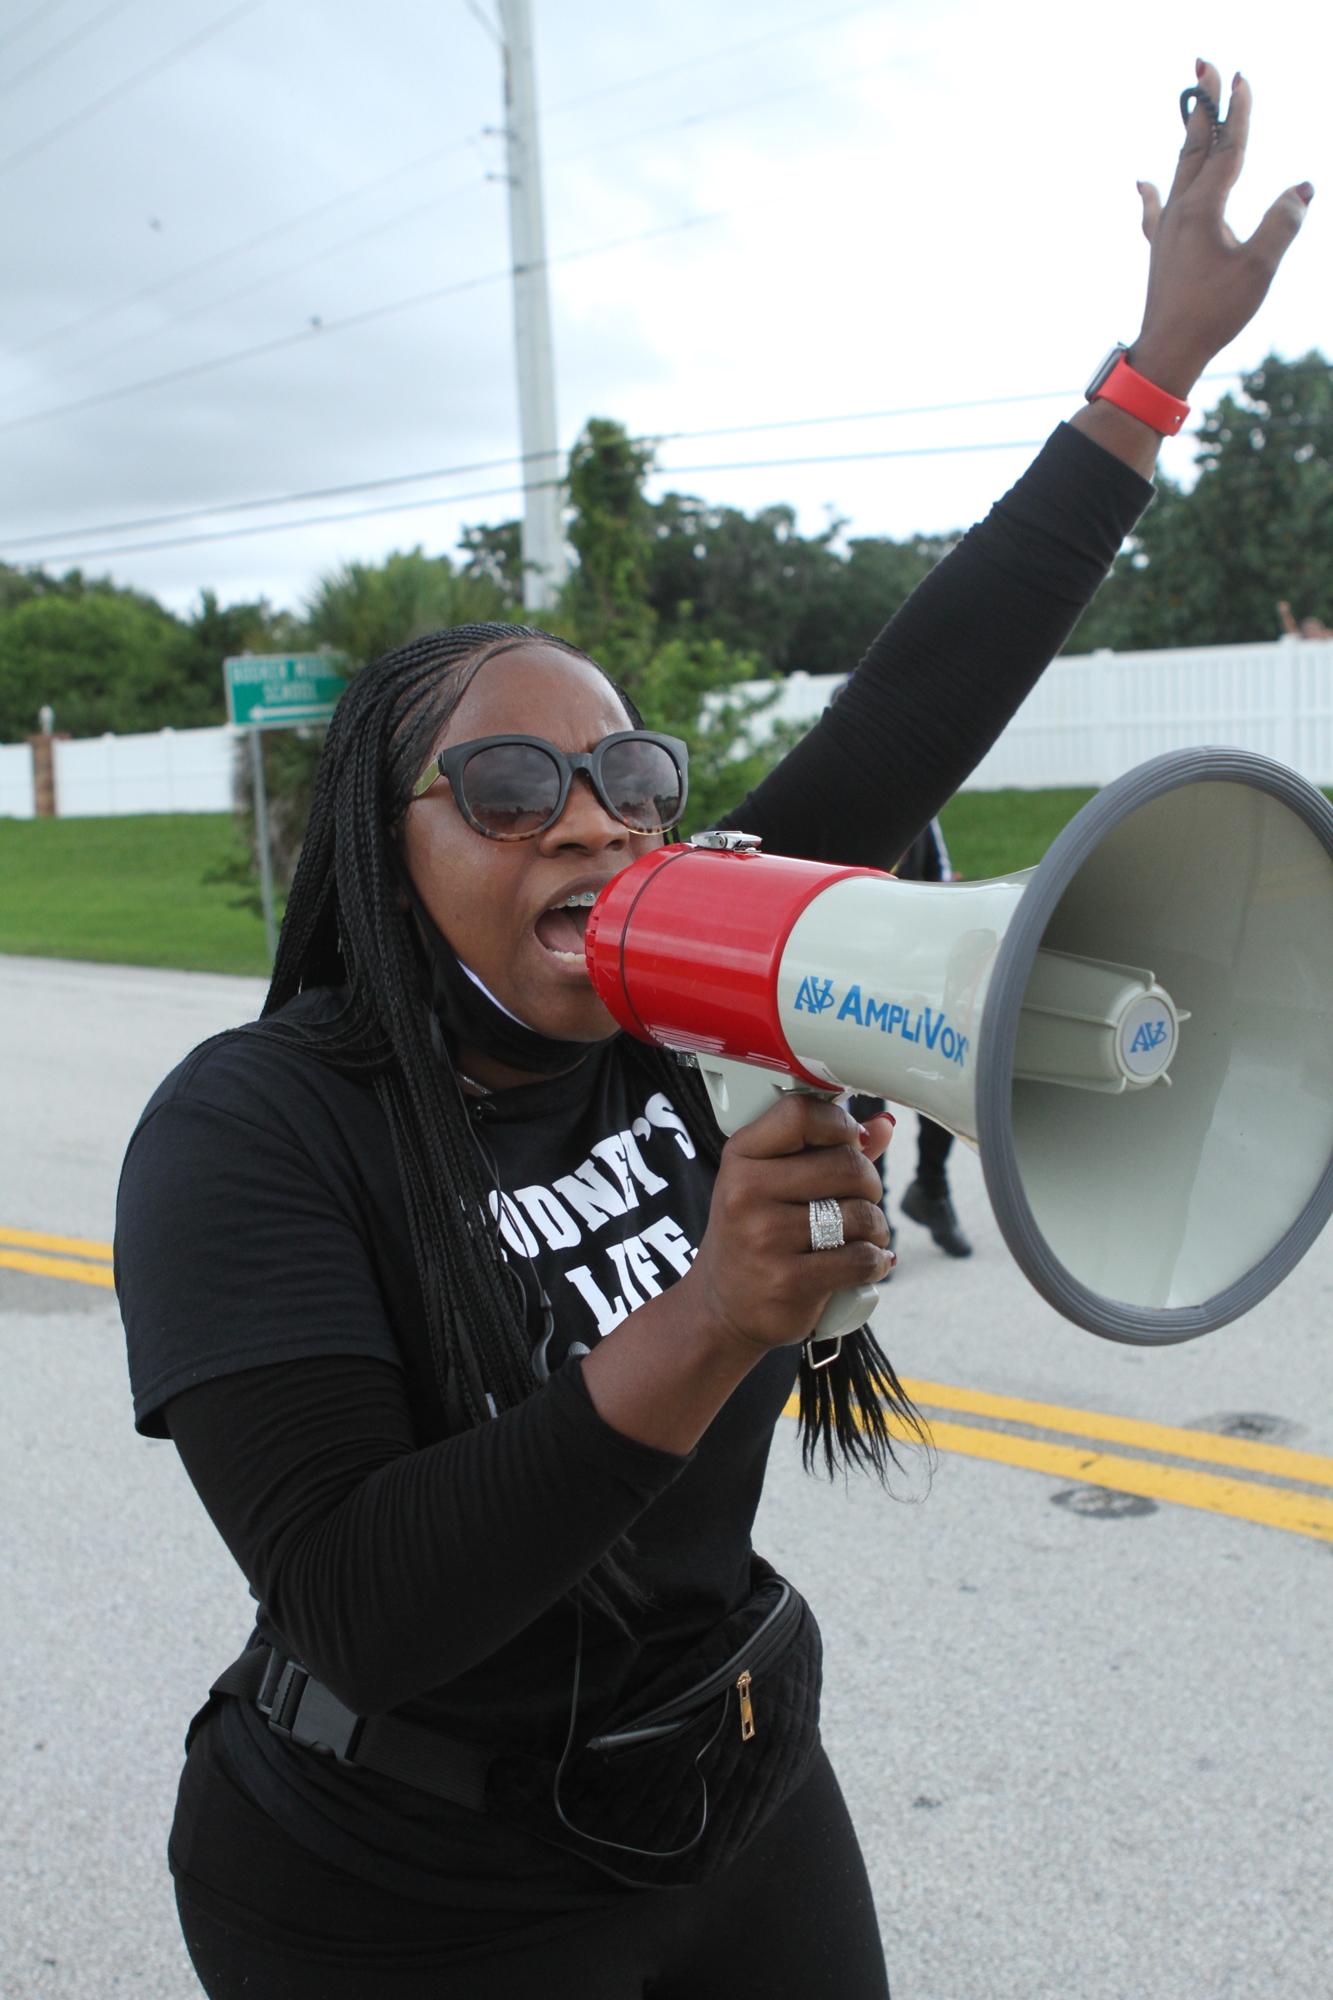 Natasha Clemons led a march from Dr. Martin Luther King Way to University Parkway on Saturday, June 6, part of a series of protest events organized by The Rodney Mitchell Foundation and Black Lives Matter Manasota.